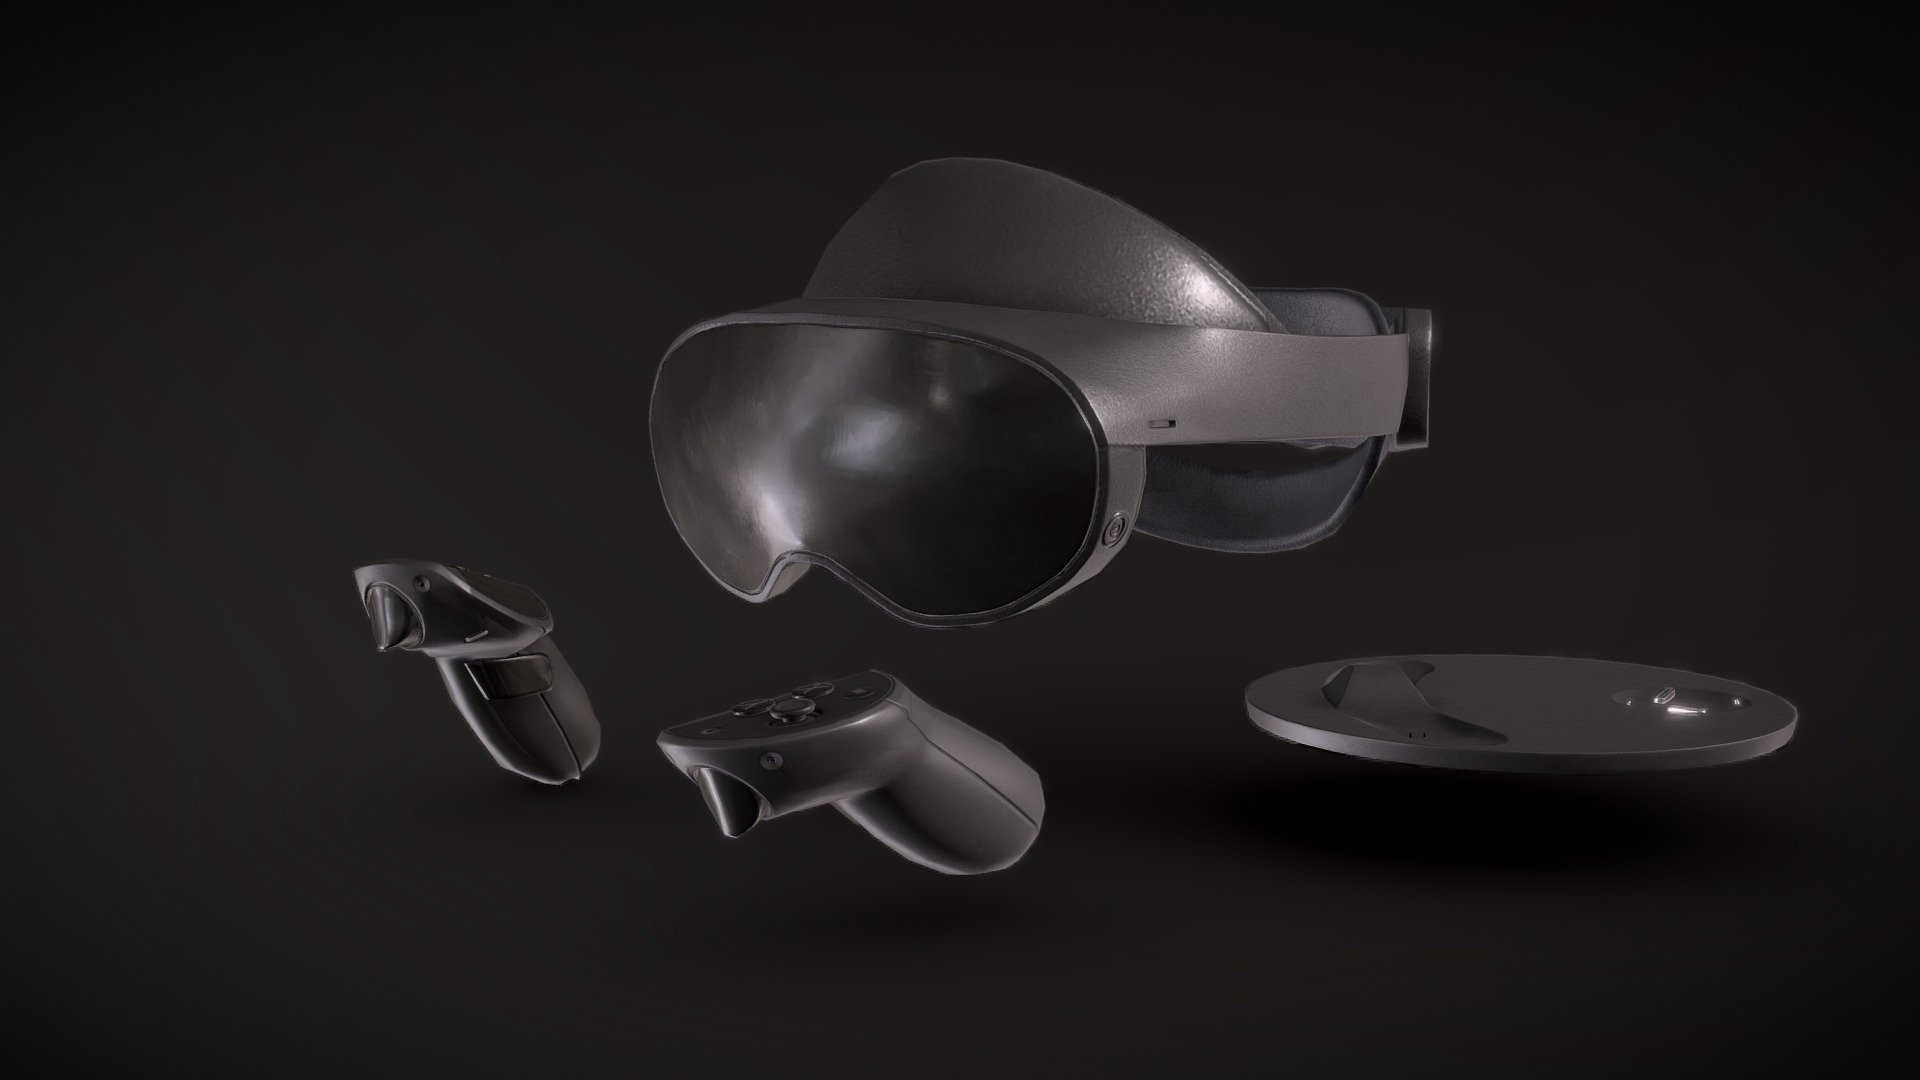 Oculus Headset 3D Model FanArt based on future Facebook Reality Labs Headset anounced on FB (Meta) Connect

RealTime PBR textured Model uvw Unwraped

Made with Blender and Substance Painter - QUEST 3 Pro Cambria - Buy Royalty Free 3D model by joseVG (@josevillotguisan) 3d model